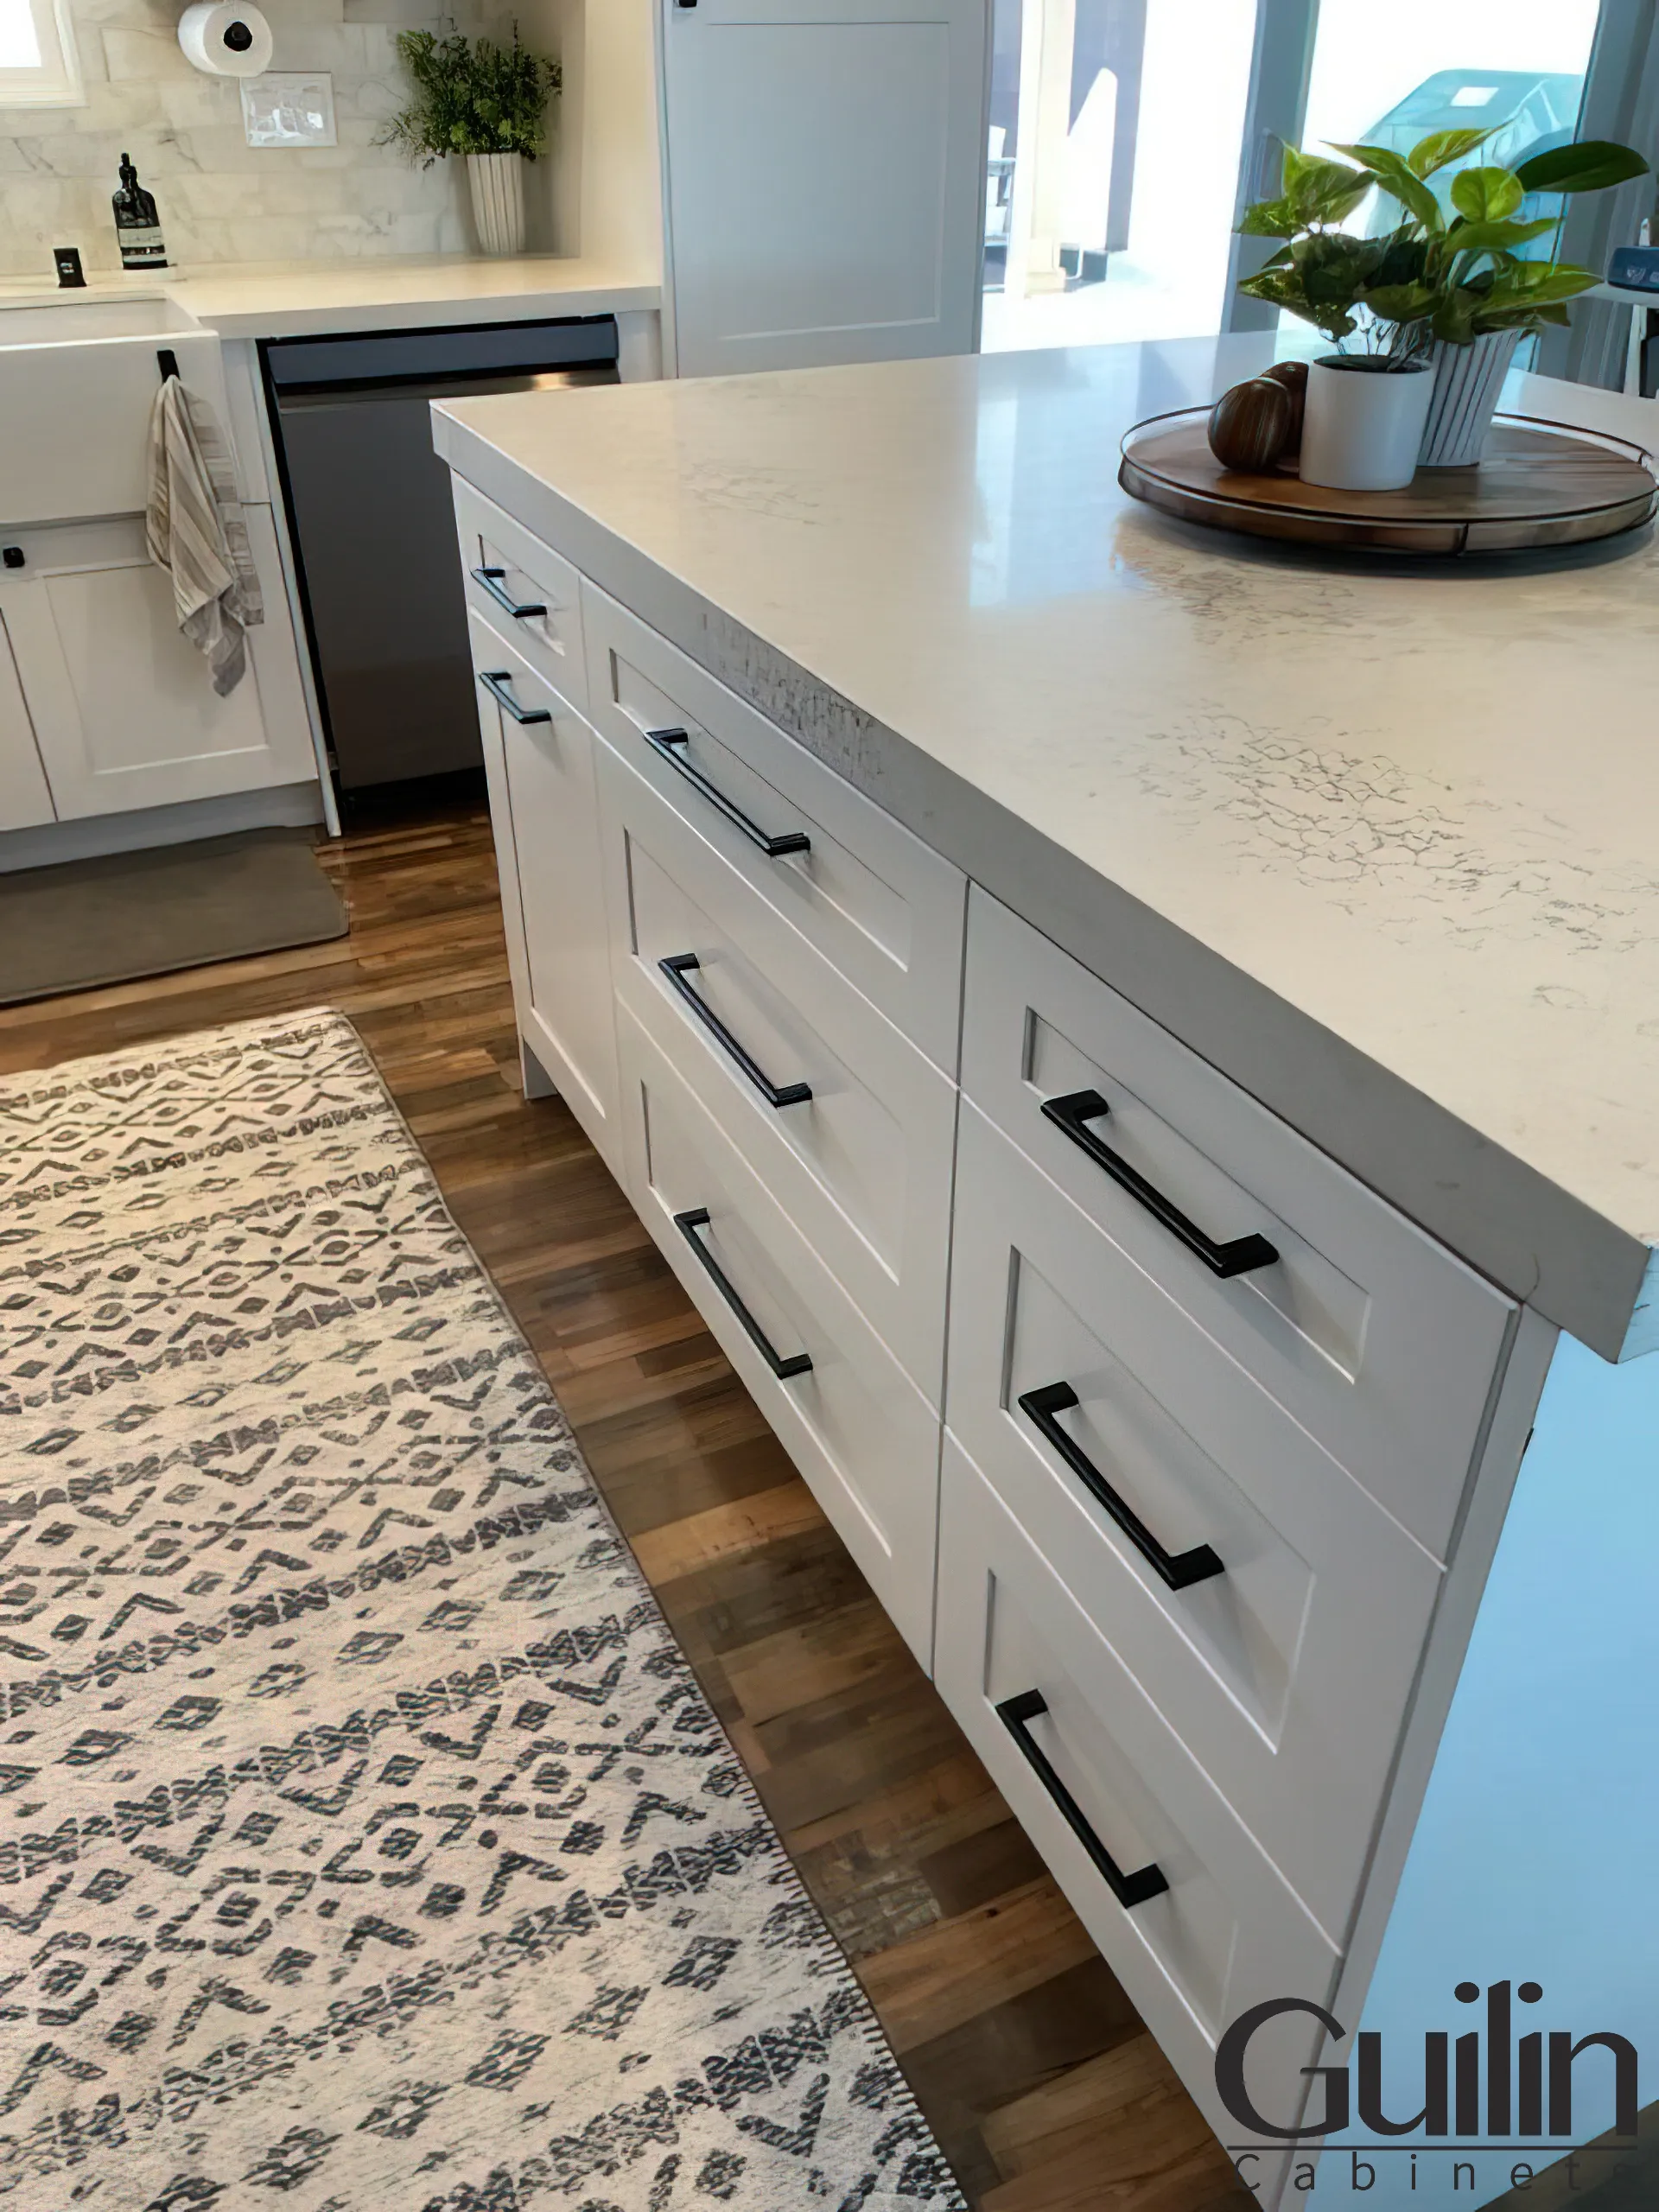 Quartz countertops are non-porous, easy to clean, and scratch-resistant